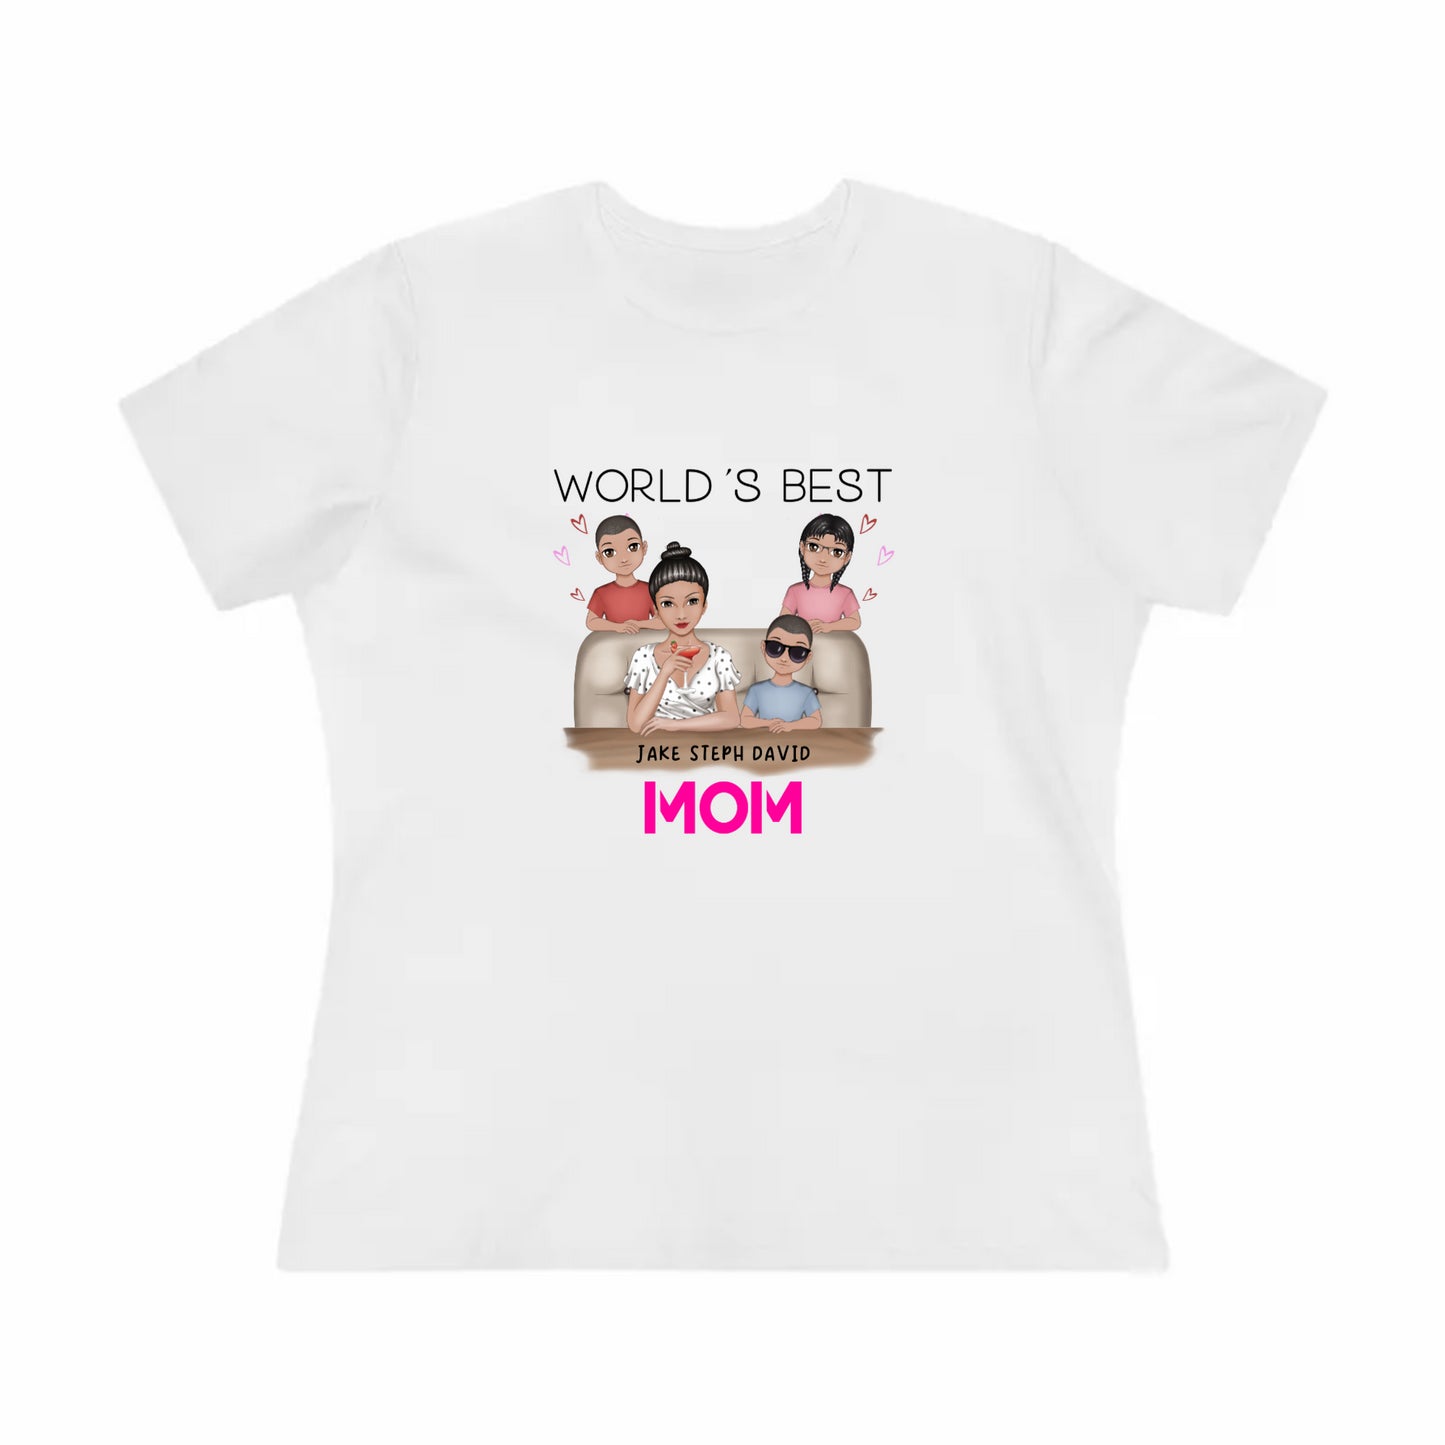 WORLD'S BEST MOM PREMIUM TEE *** PERSONALIZE IMAGES ***